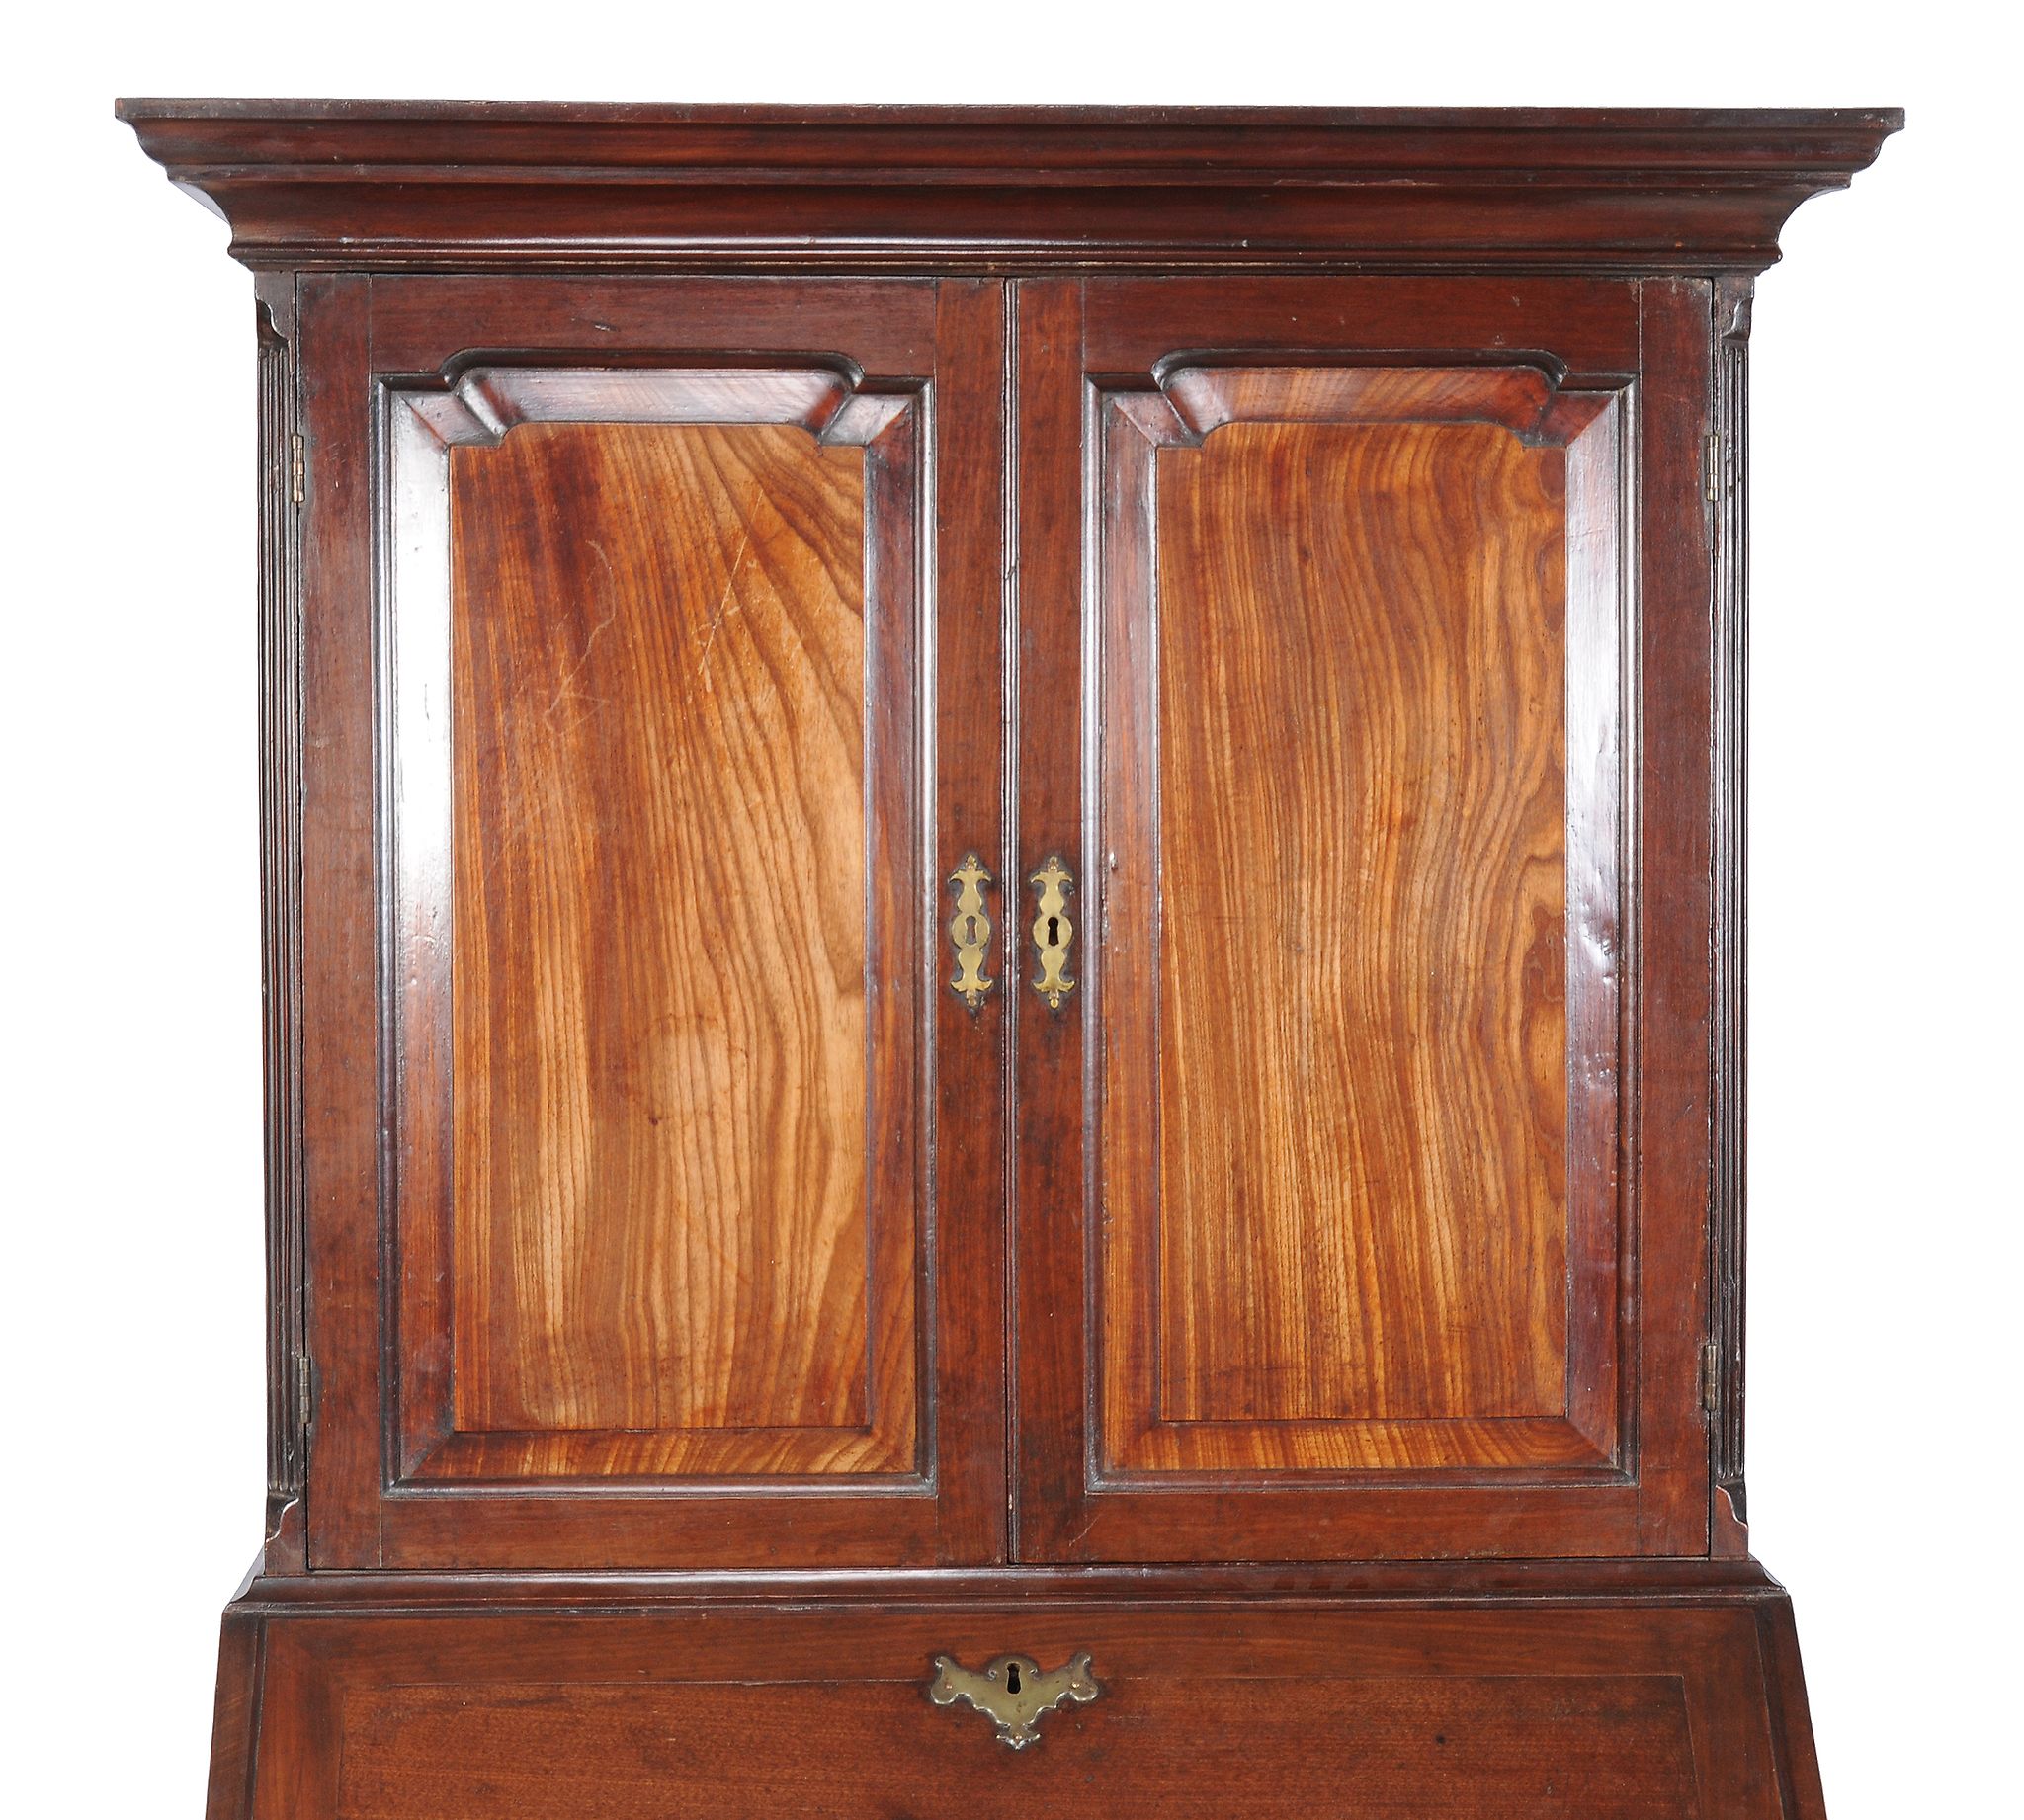 A George II mahogany bureau cabinet, circa 1750, the moulded cornice above a pair of panelled doors - Image 5 of 5